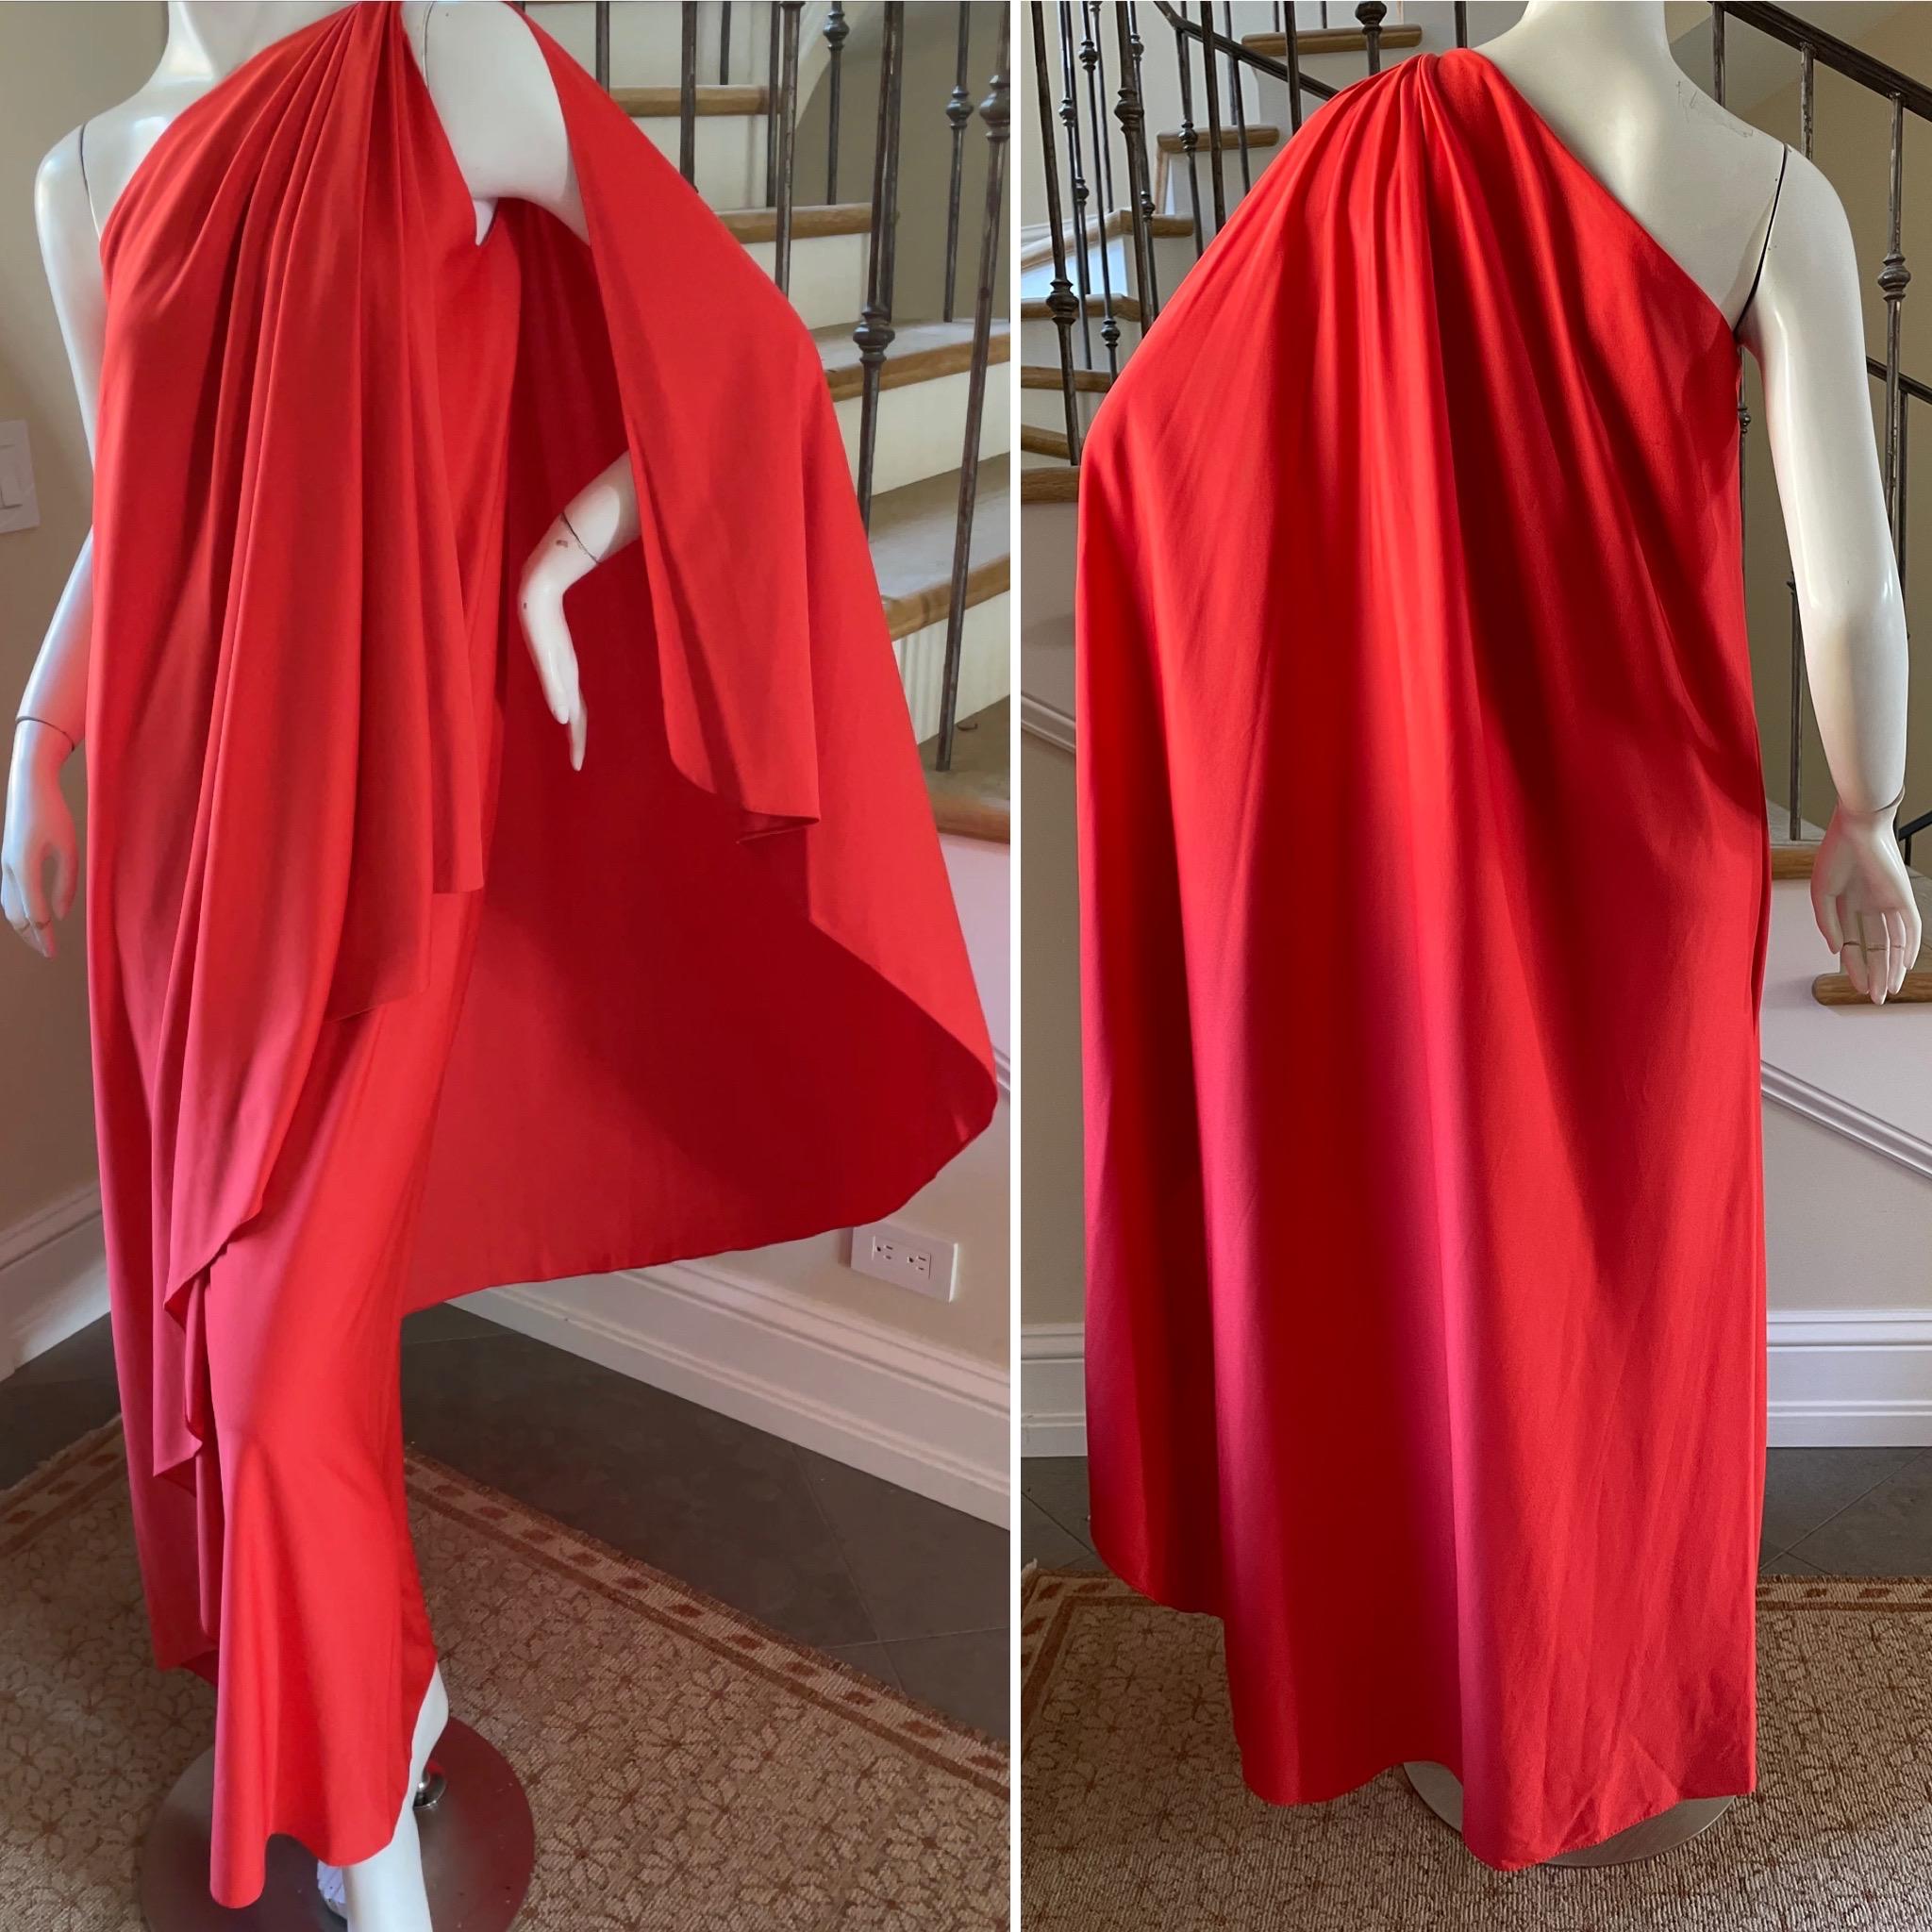 Halston Vintage 1980's Coral Red Caftan Dress.
The master of draping and gathering fabric, Halston elevated Caftan dressing in the 70's and 80's.
This beautiful piece was for his Halston IV line ,fashion for the masses. Chic, no?
Created with one